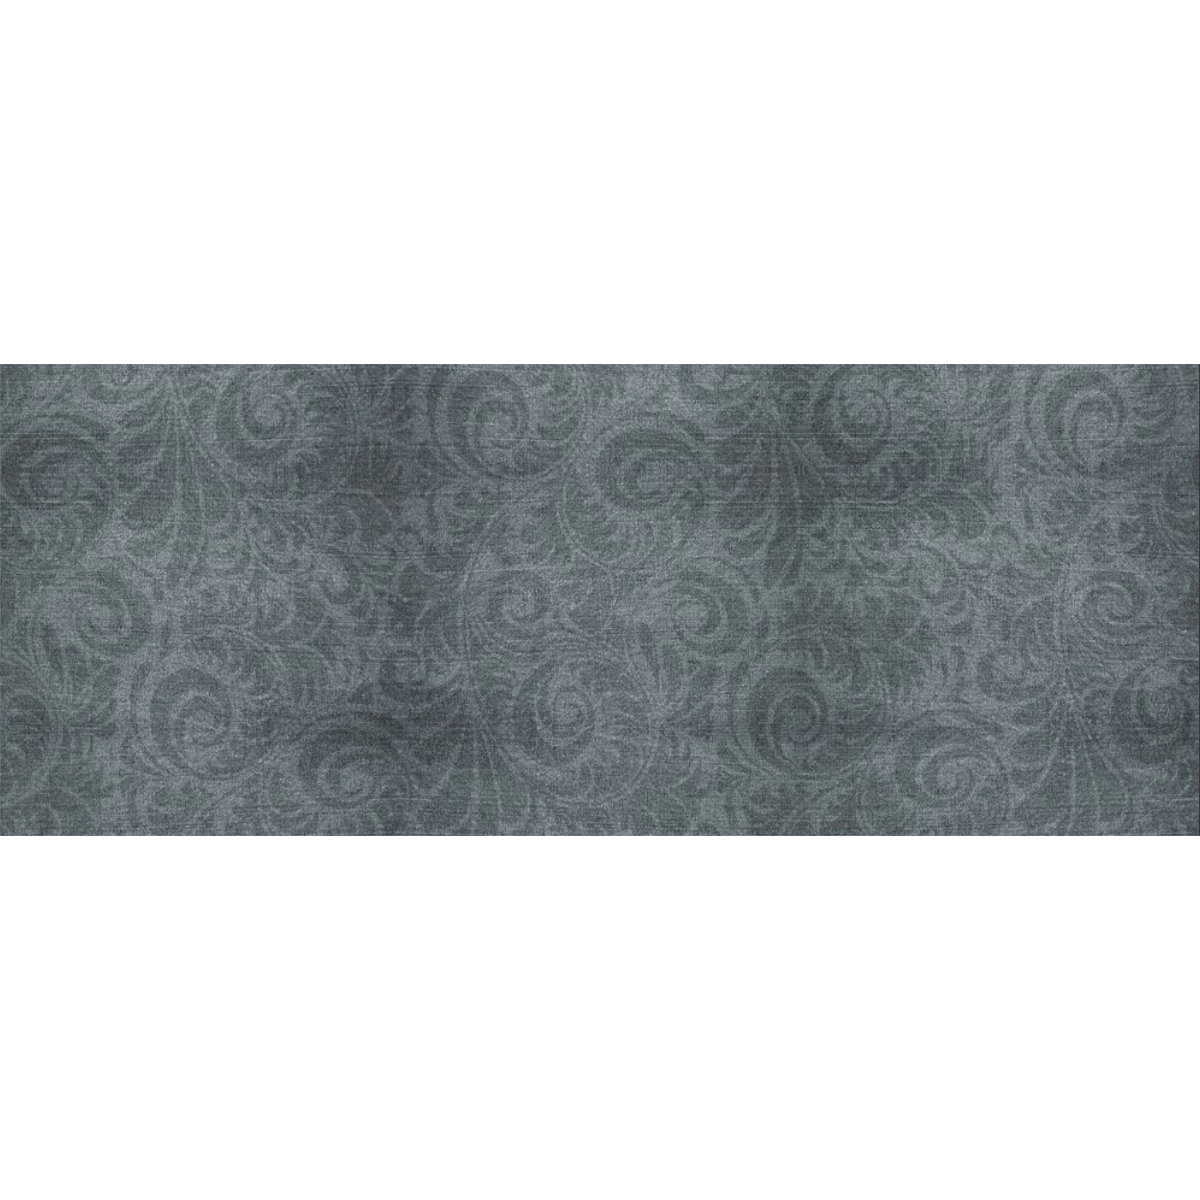 Denim with vintage floral pattern, grey, green Gift Wrapping Paper 58"x 23" (5 Rolls)